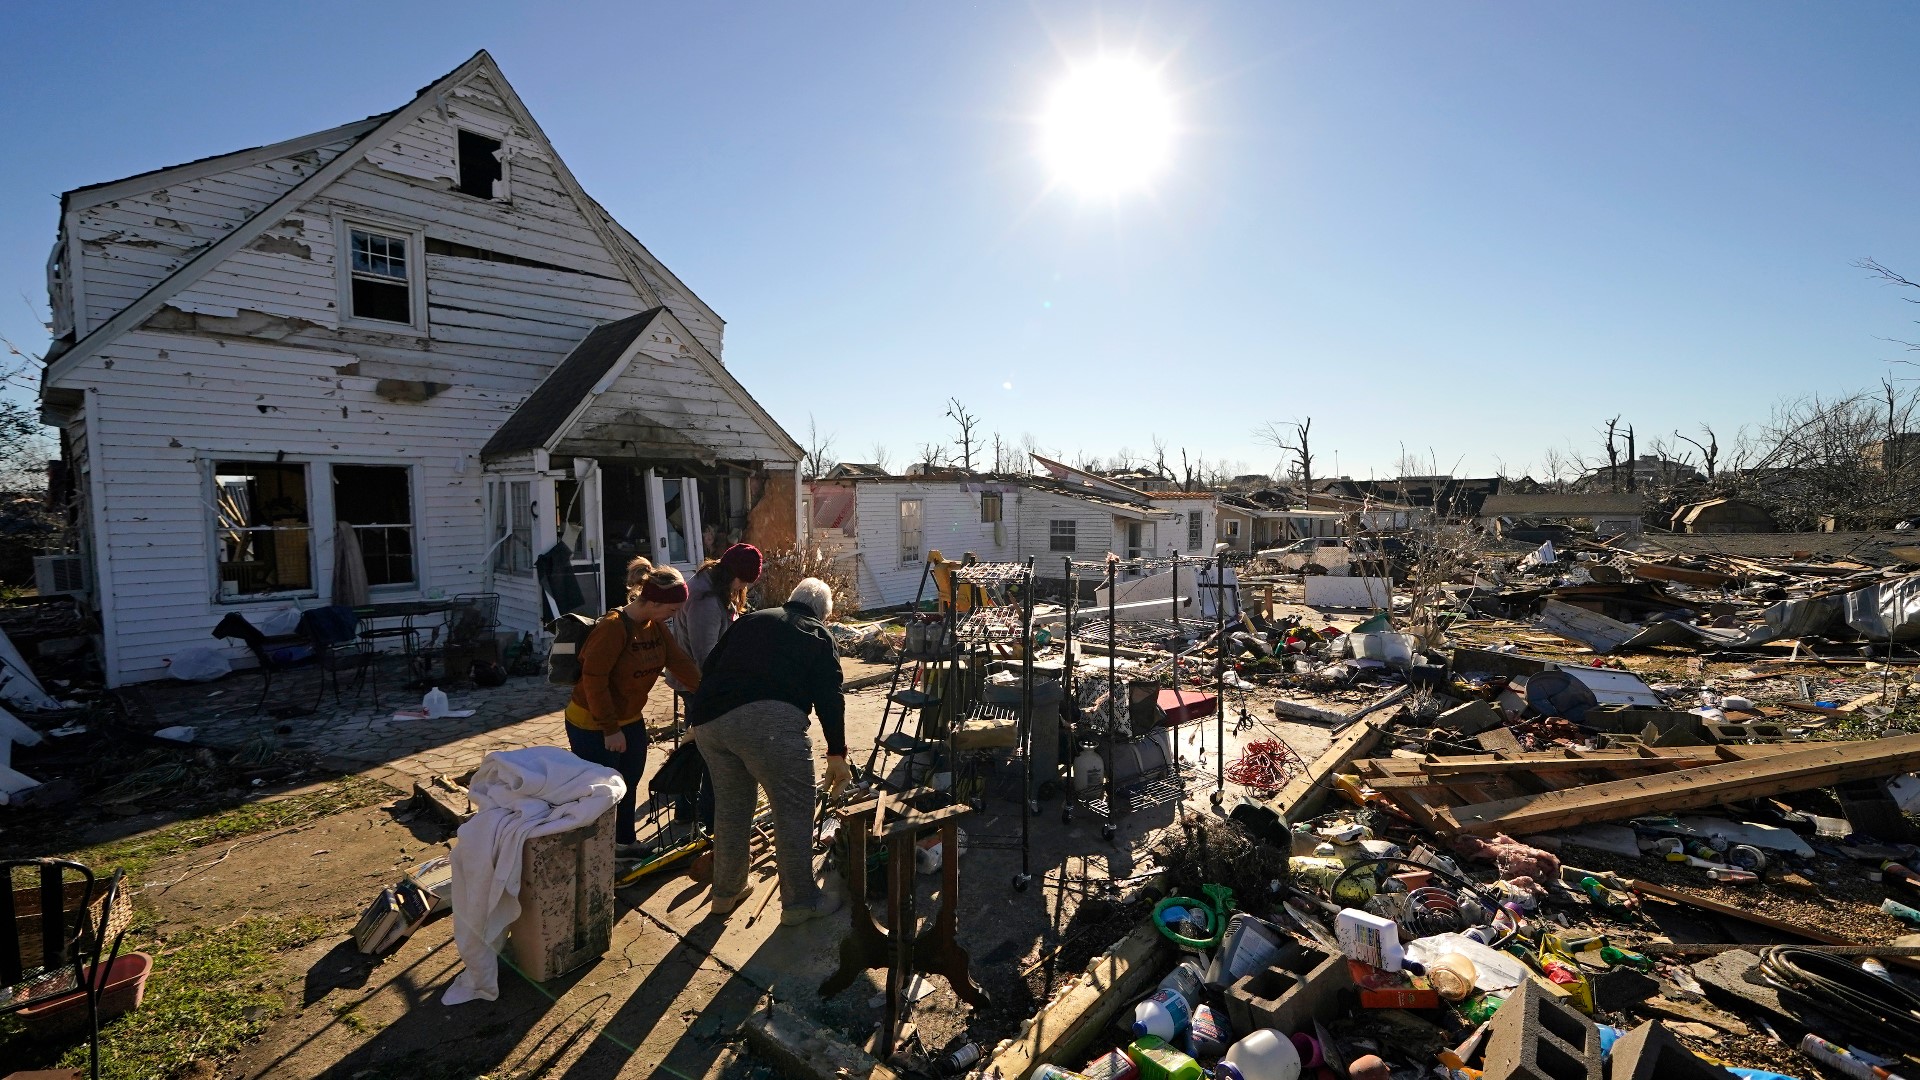 The number of people killed in the storms remains at 74 and there are 122 Kentuckians unaccounted for.